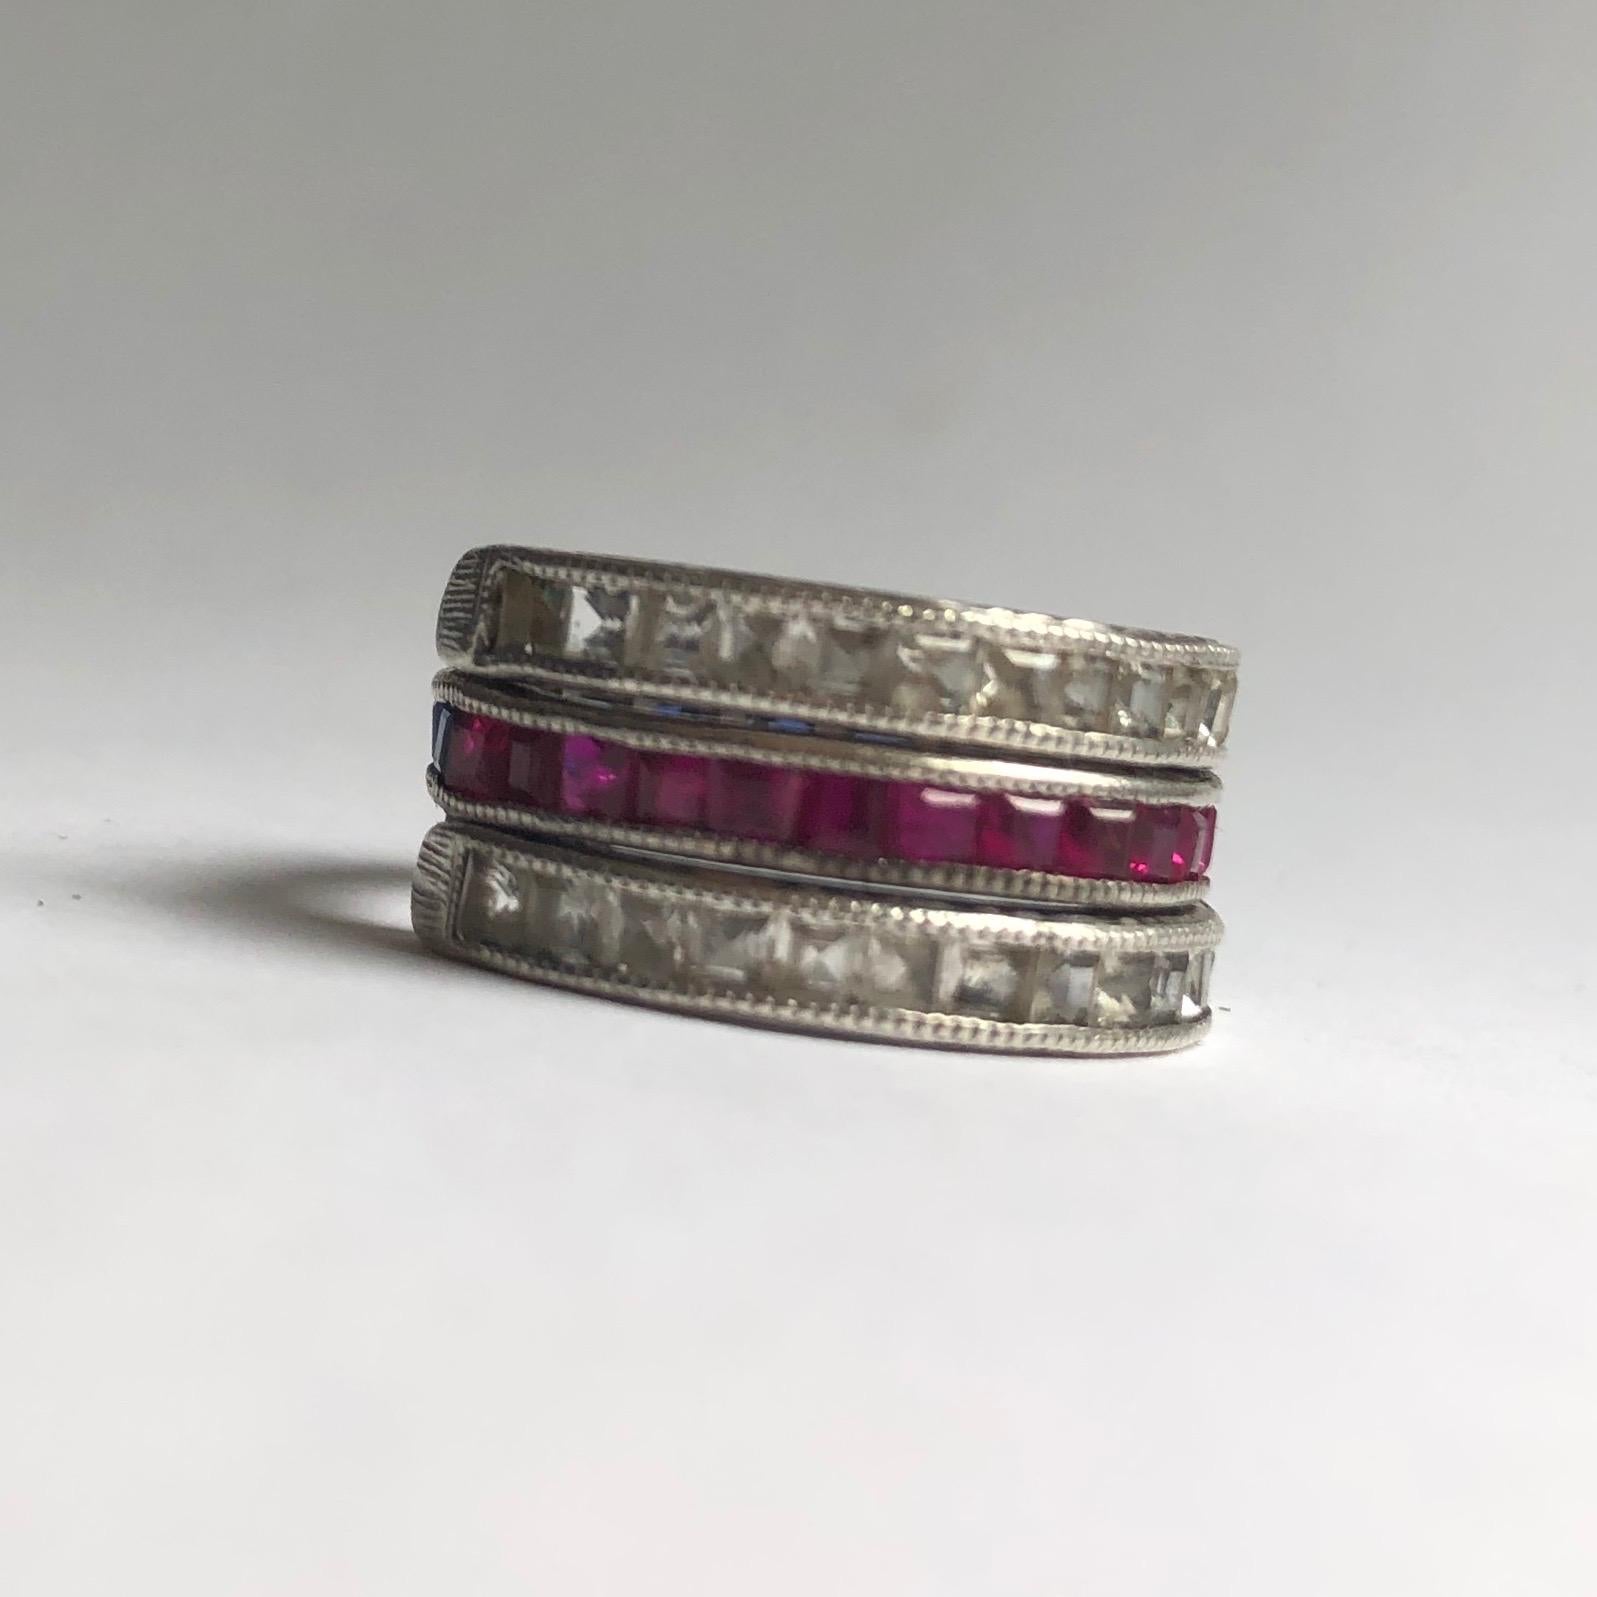 This gorgeous day to night eternity band holds a central band which holds half a band of rubies and half blue sapphires. These stones measure 5pts each. Either side of the ruby and sapphire band there are two bands holding white sapphires which can